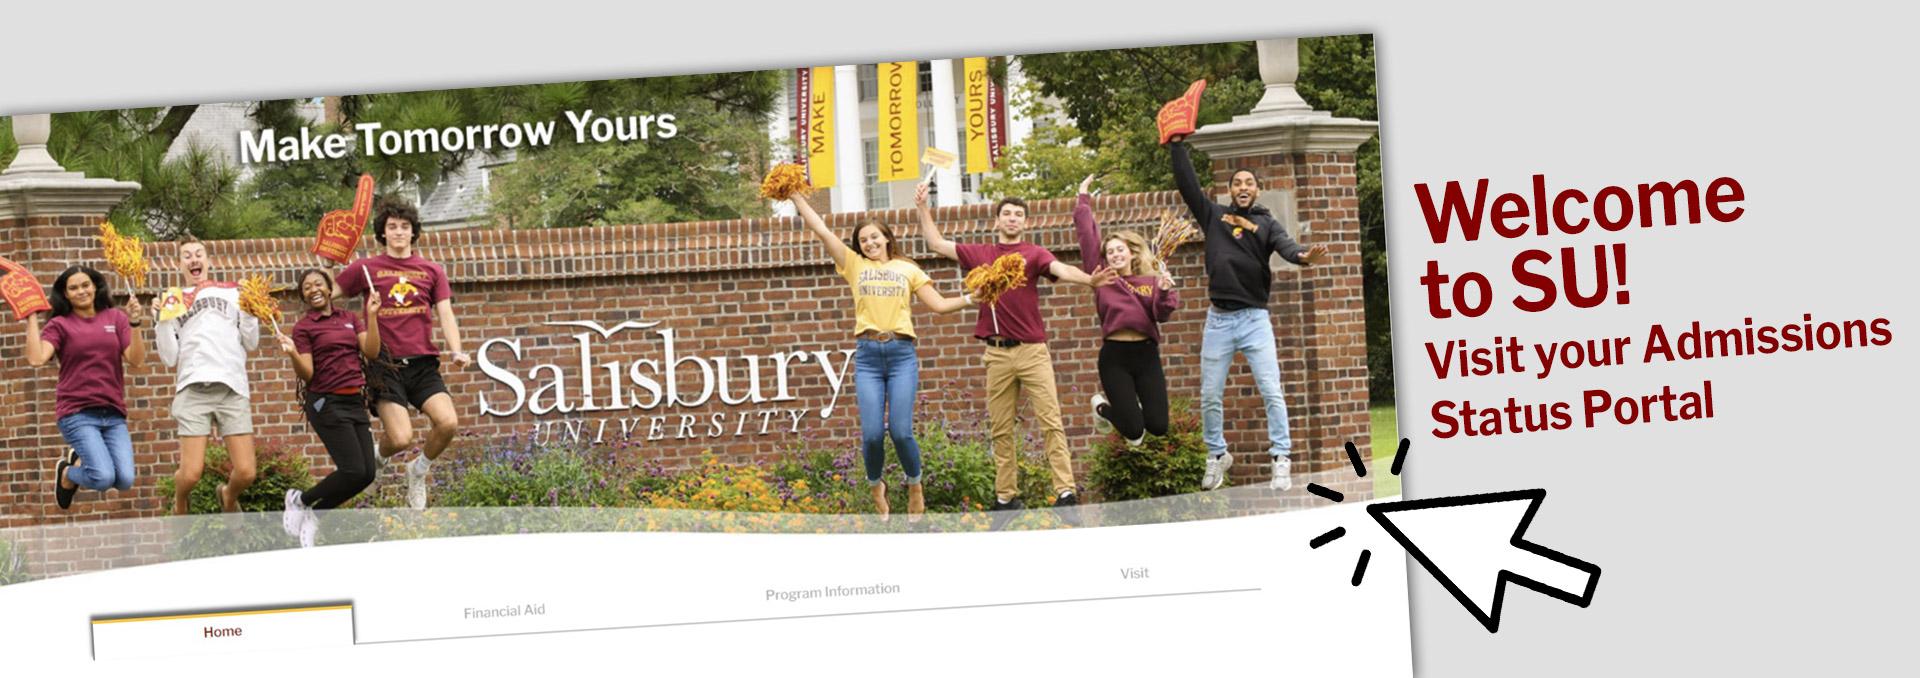 Admitted Student Portal Homepage Screen Shot